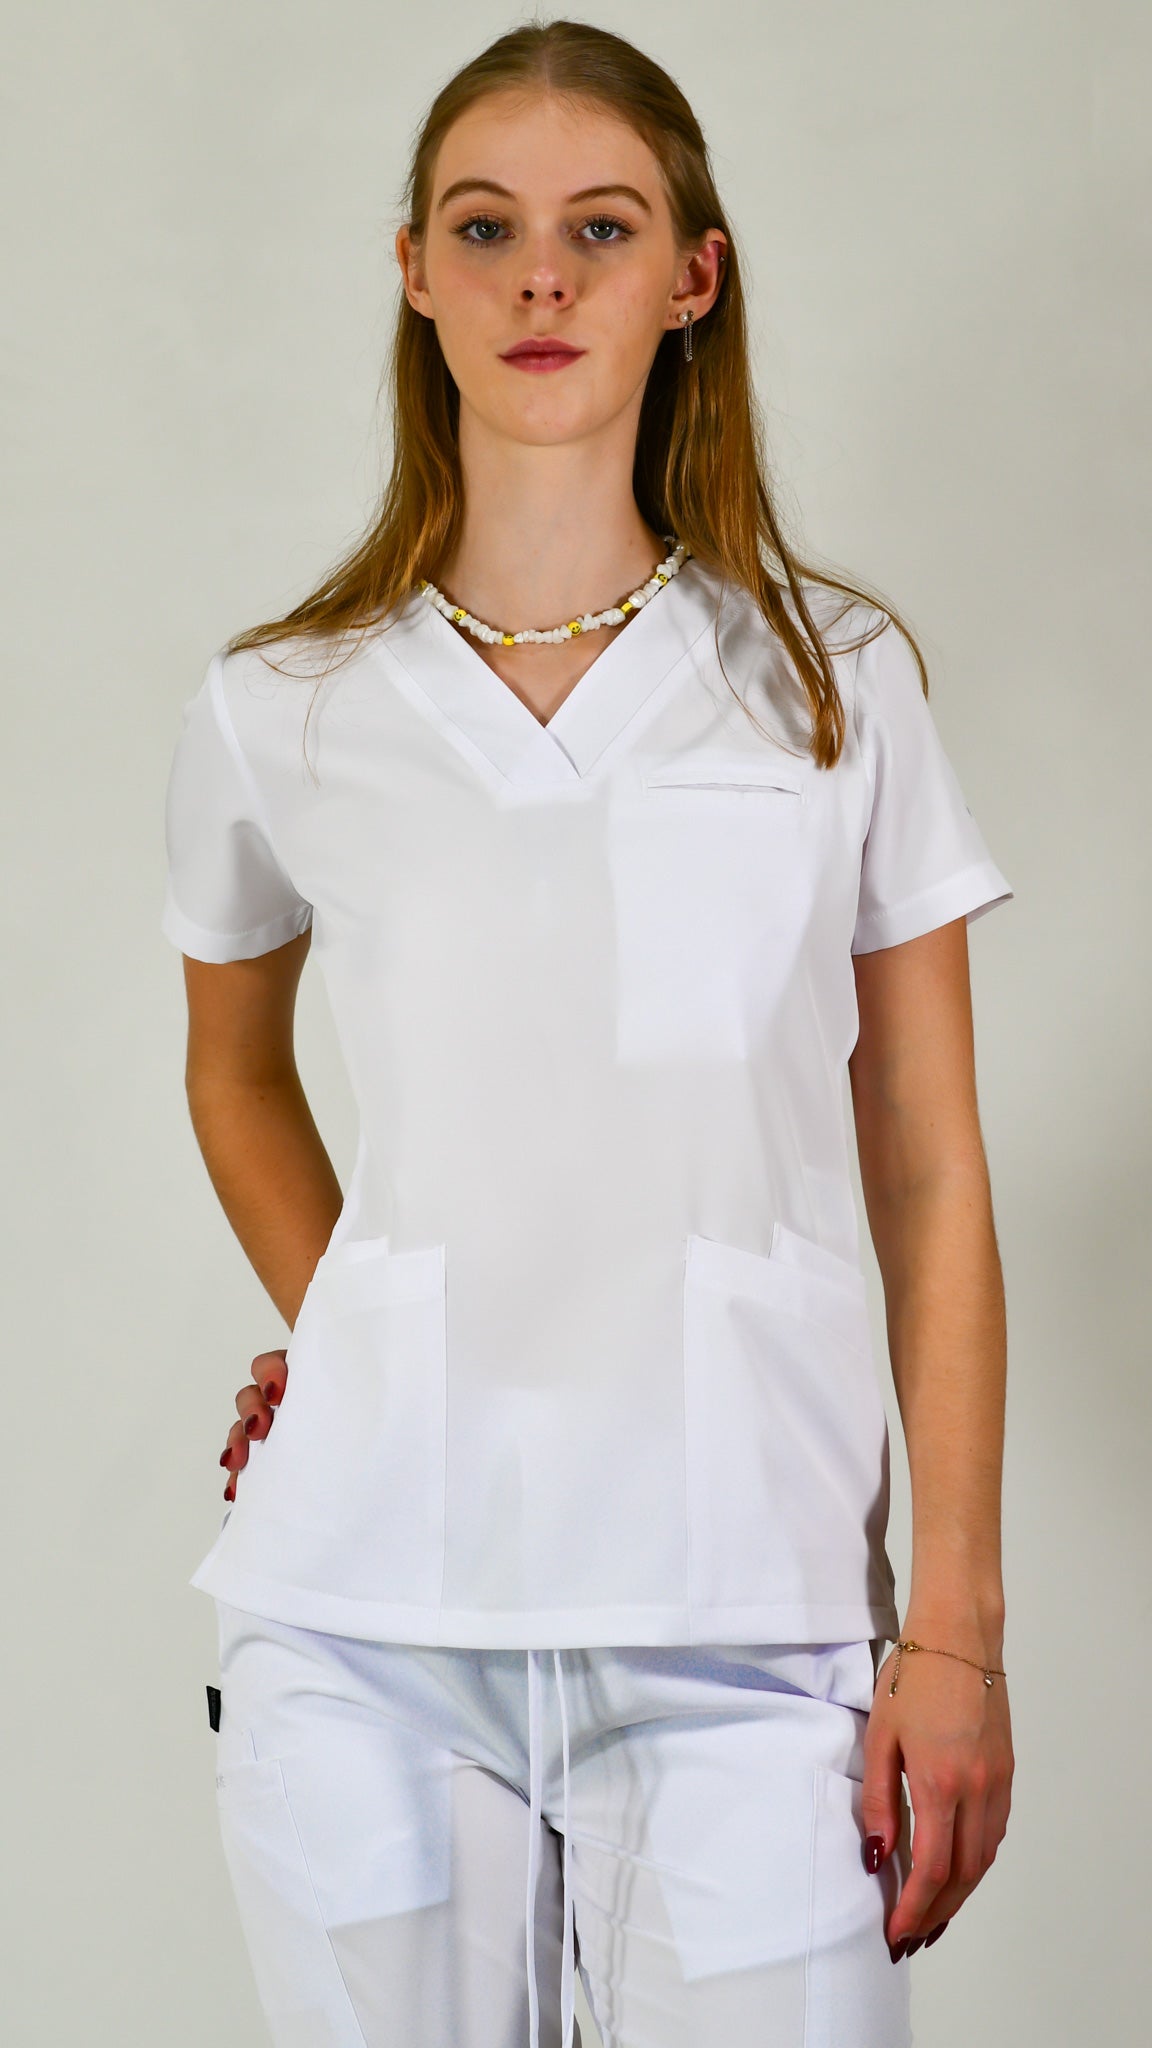 Women's Scrub Tops At The Uniform Outlet